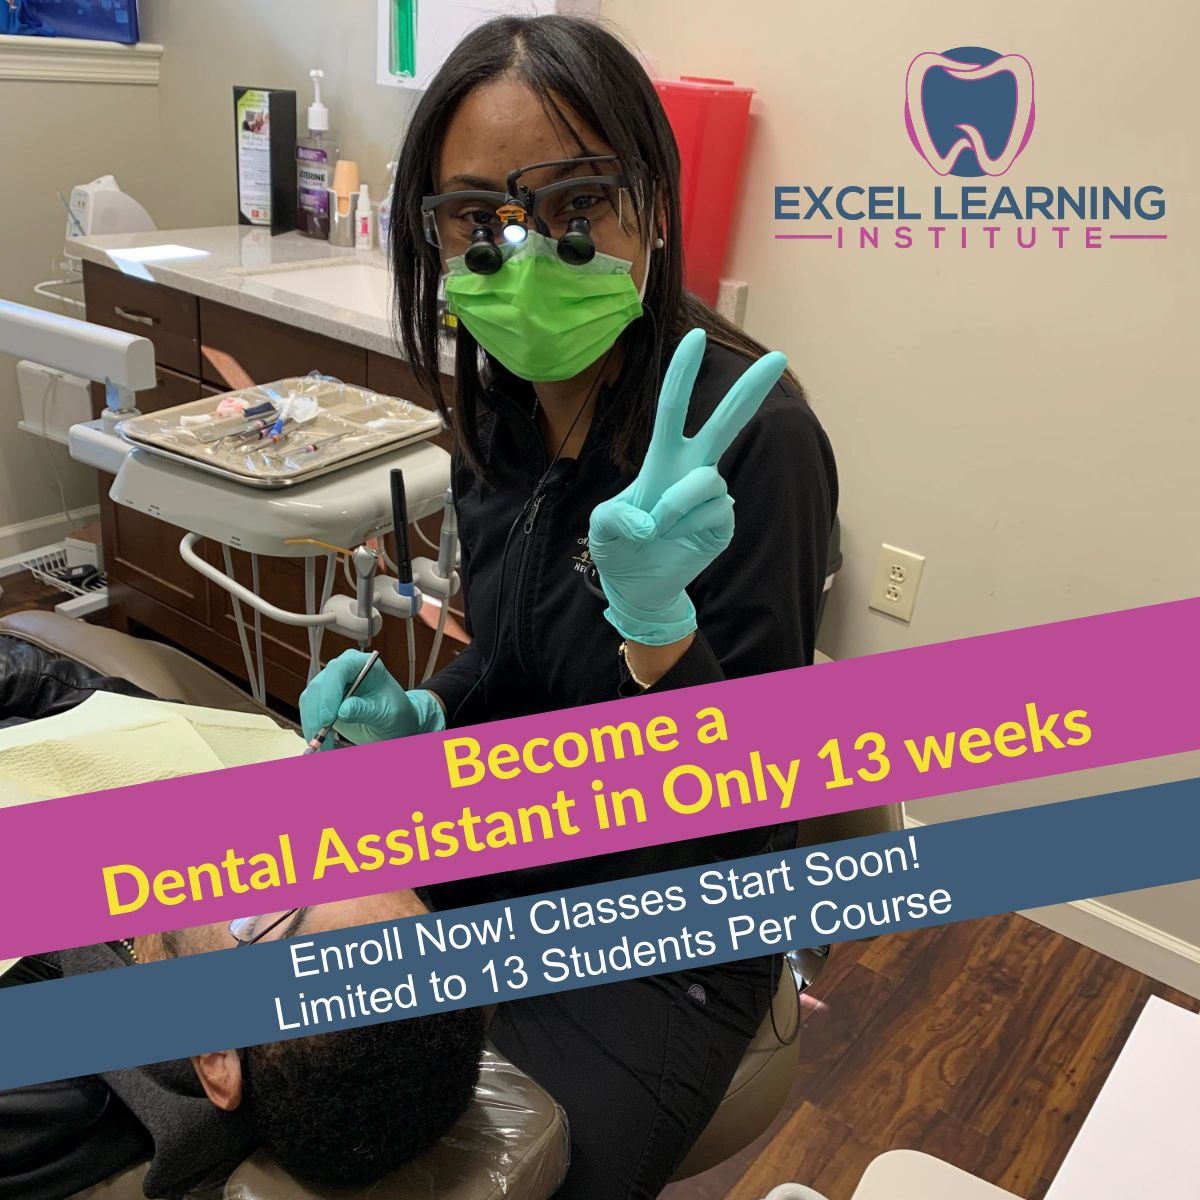 Excel Learning Institute Dental assistant school